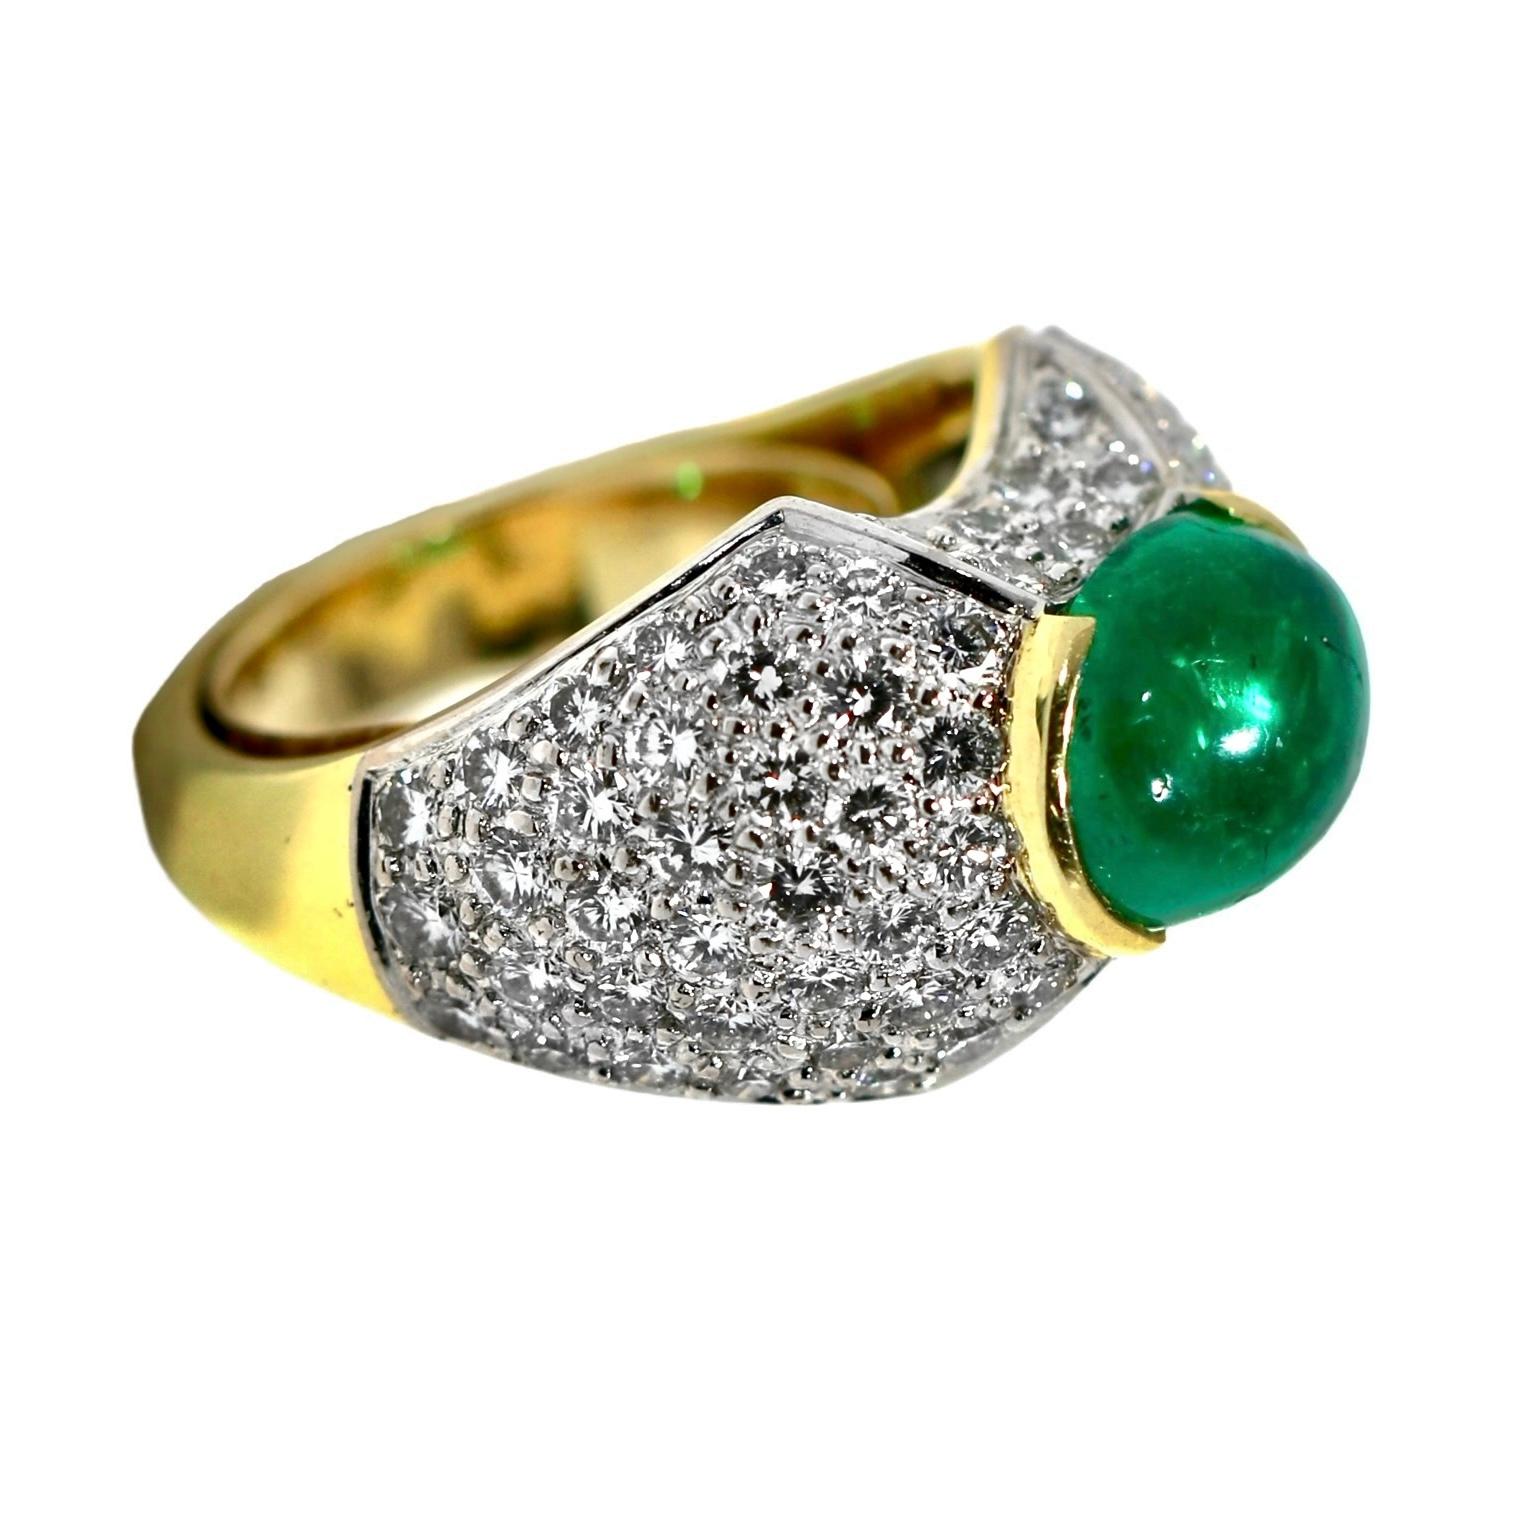 This elegant 18k yellow gold Late-20th century ladies dome ring  is set with one rich green natural Colombian emerald double cabochon weighing approximately 3.15ct. Color saturation in this gem is very intense and uniform. GIA report number